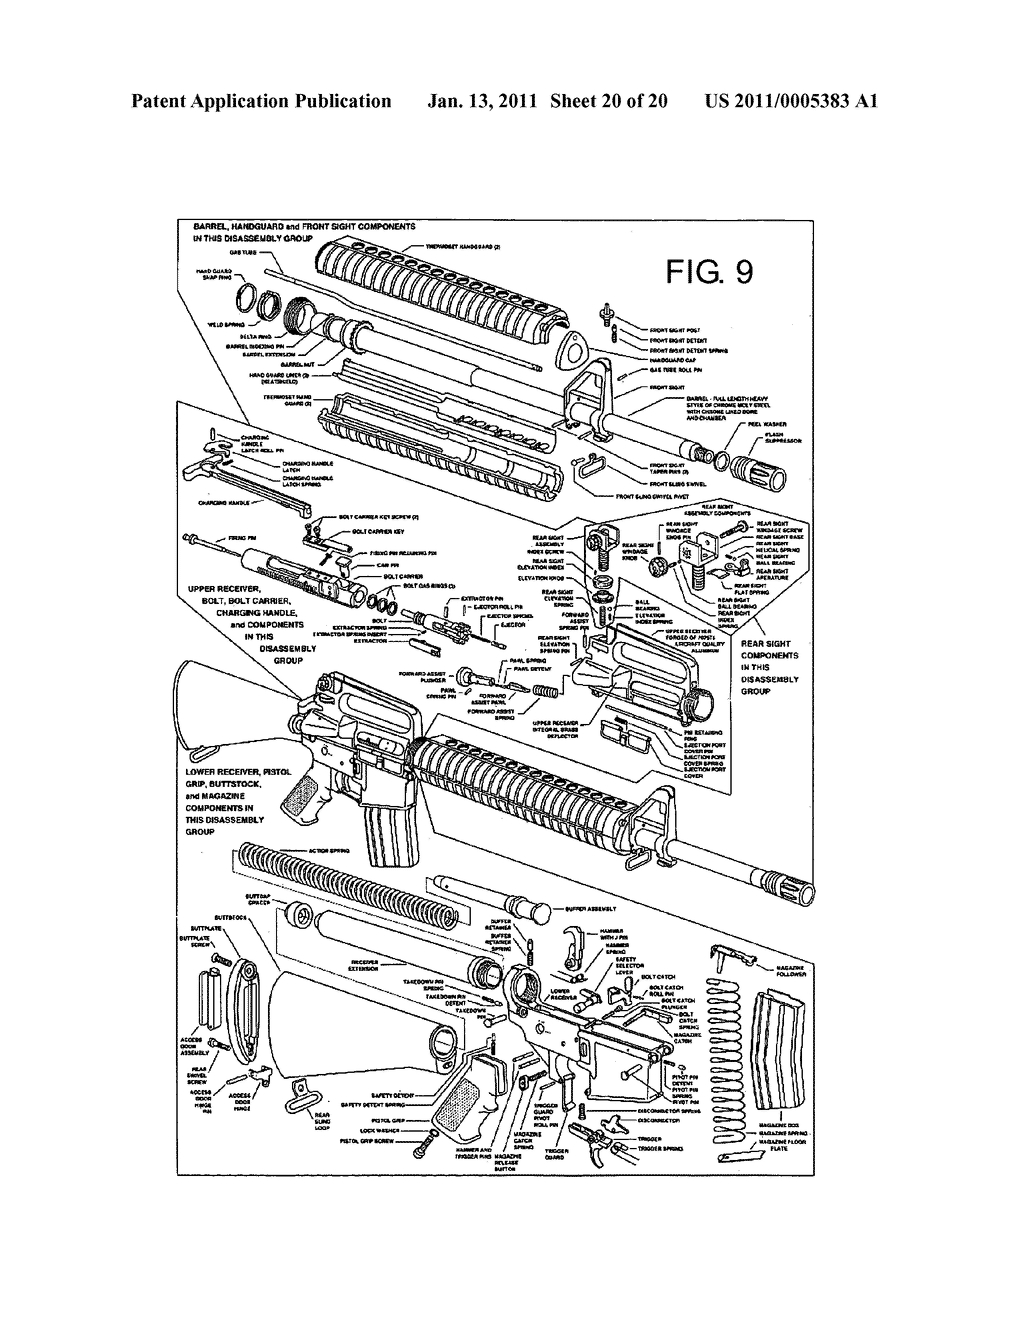 Ar 15 Parts Diagram Cartridges And Modifications For M16ar15 Rifle Diagram Schematic